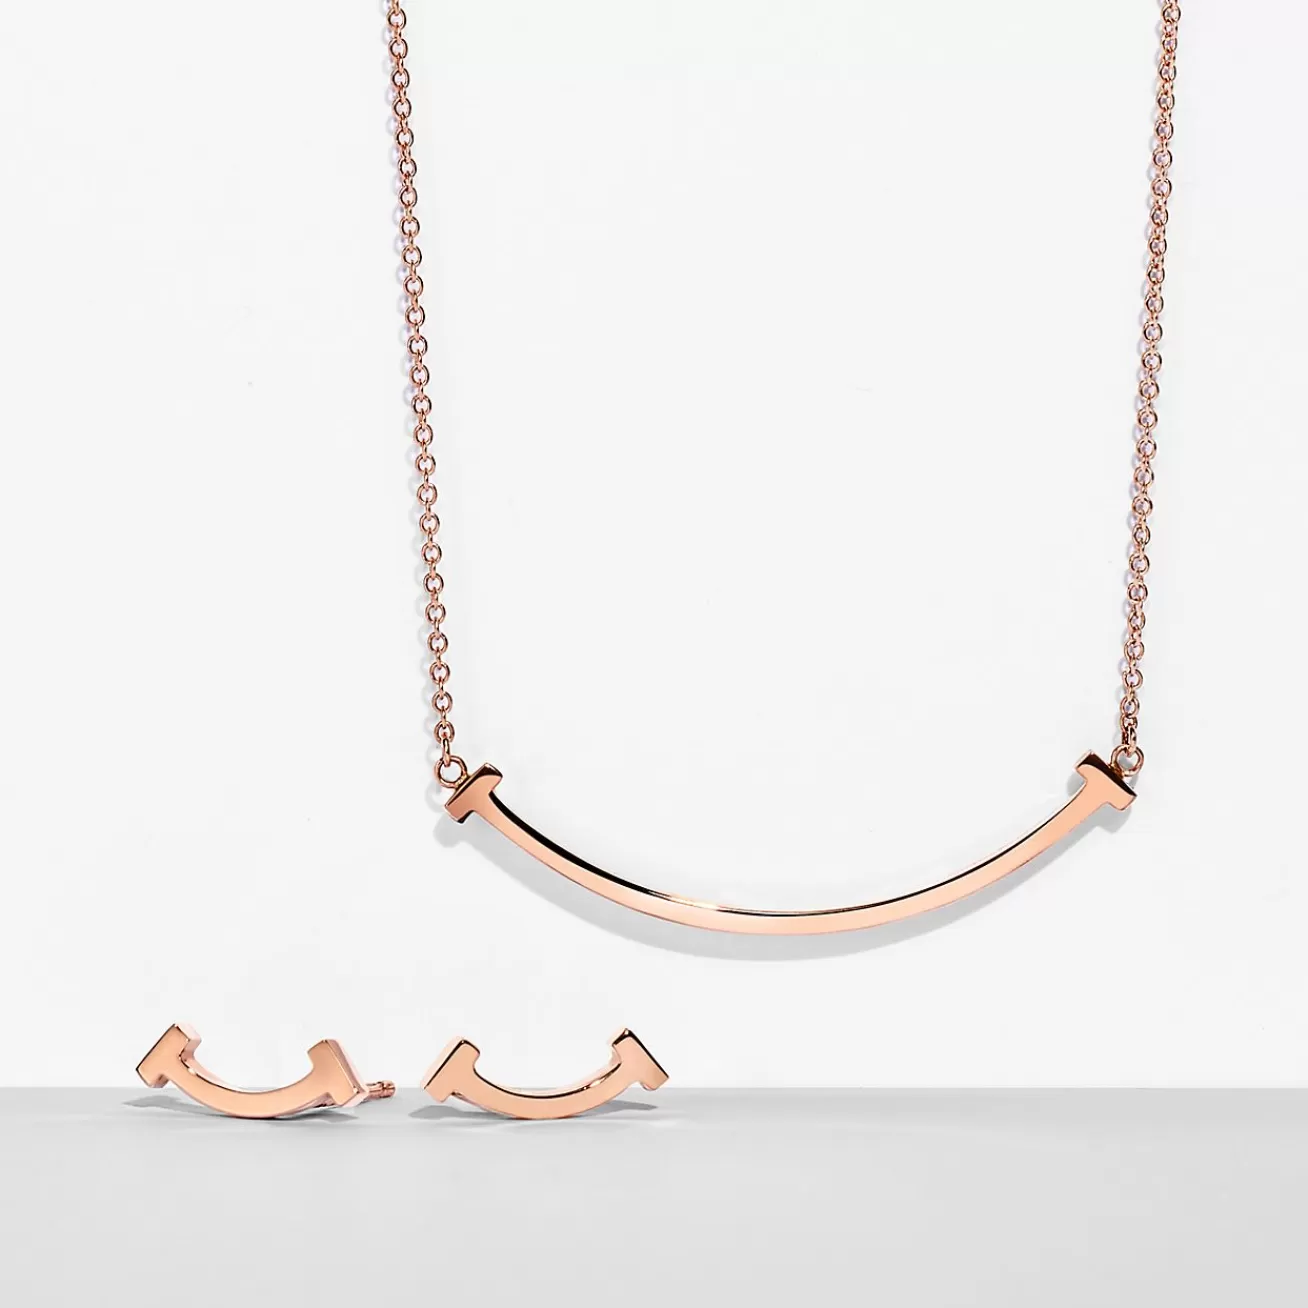 Tiffany & Co. Tiffany T Smile Pendant and Earrings Set in Rose Gold | ^ Tiffany T | Online Exclusives